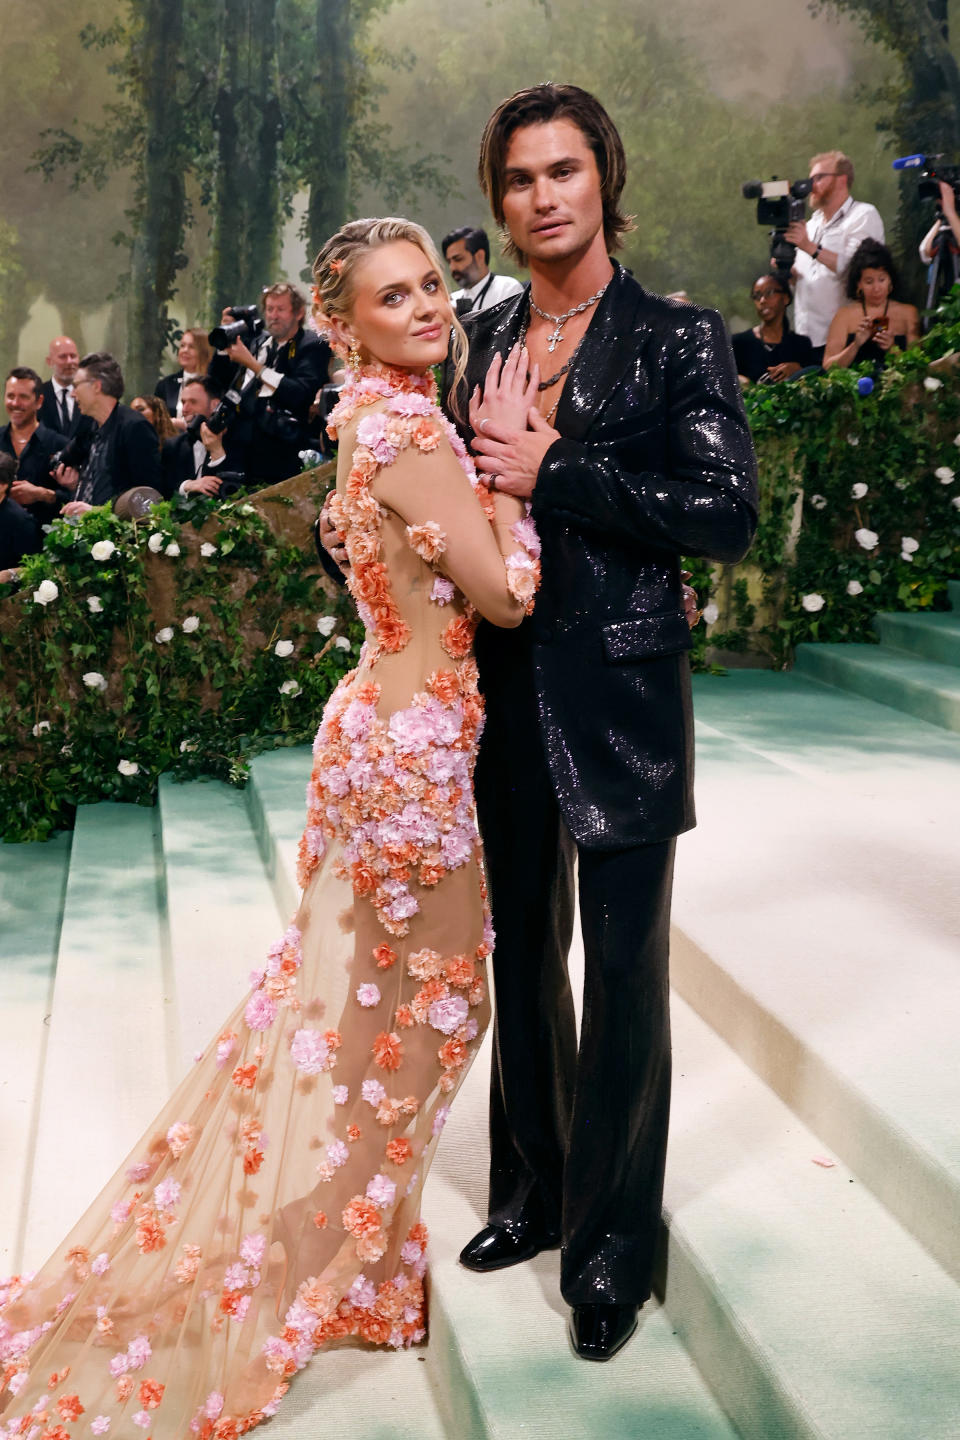 Two individuals at an event. Person one in a floral-embellished sheer gown; person two in a sparkling black suit. Photographers in the background